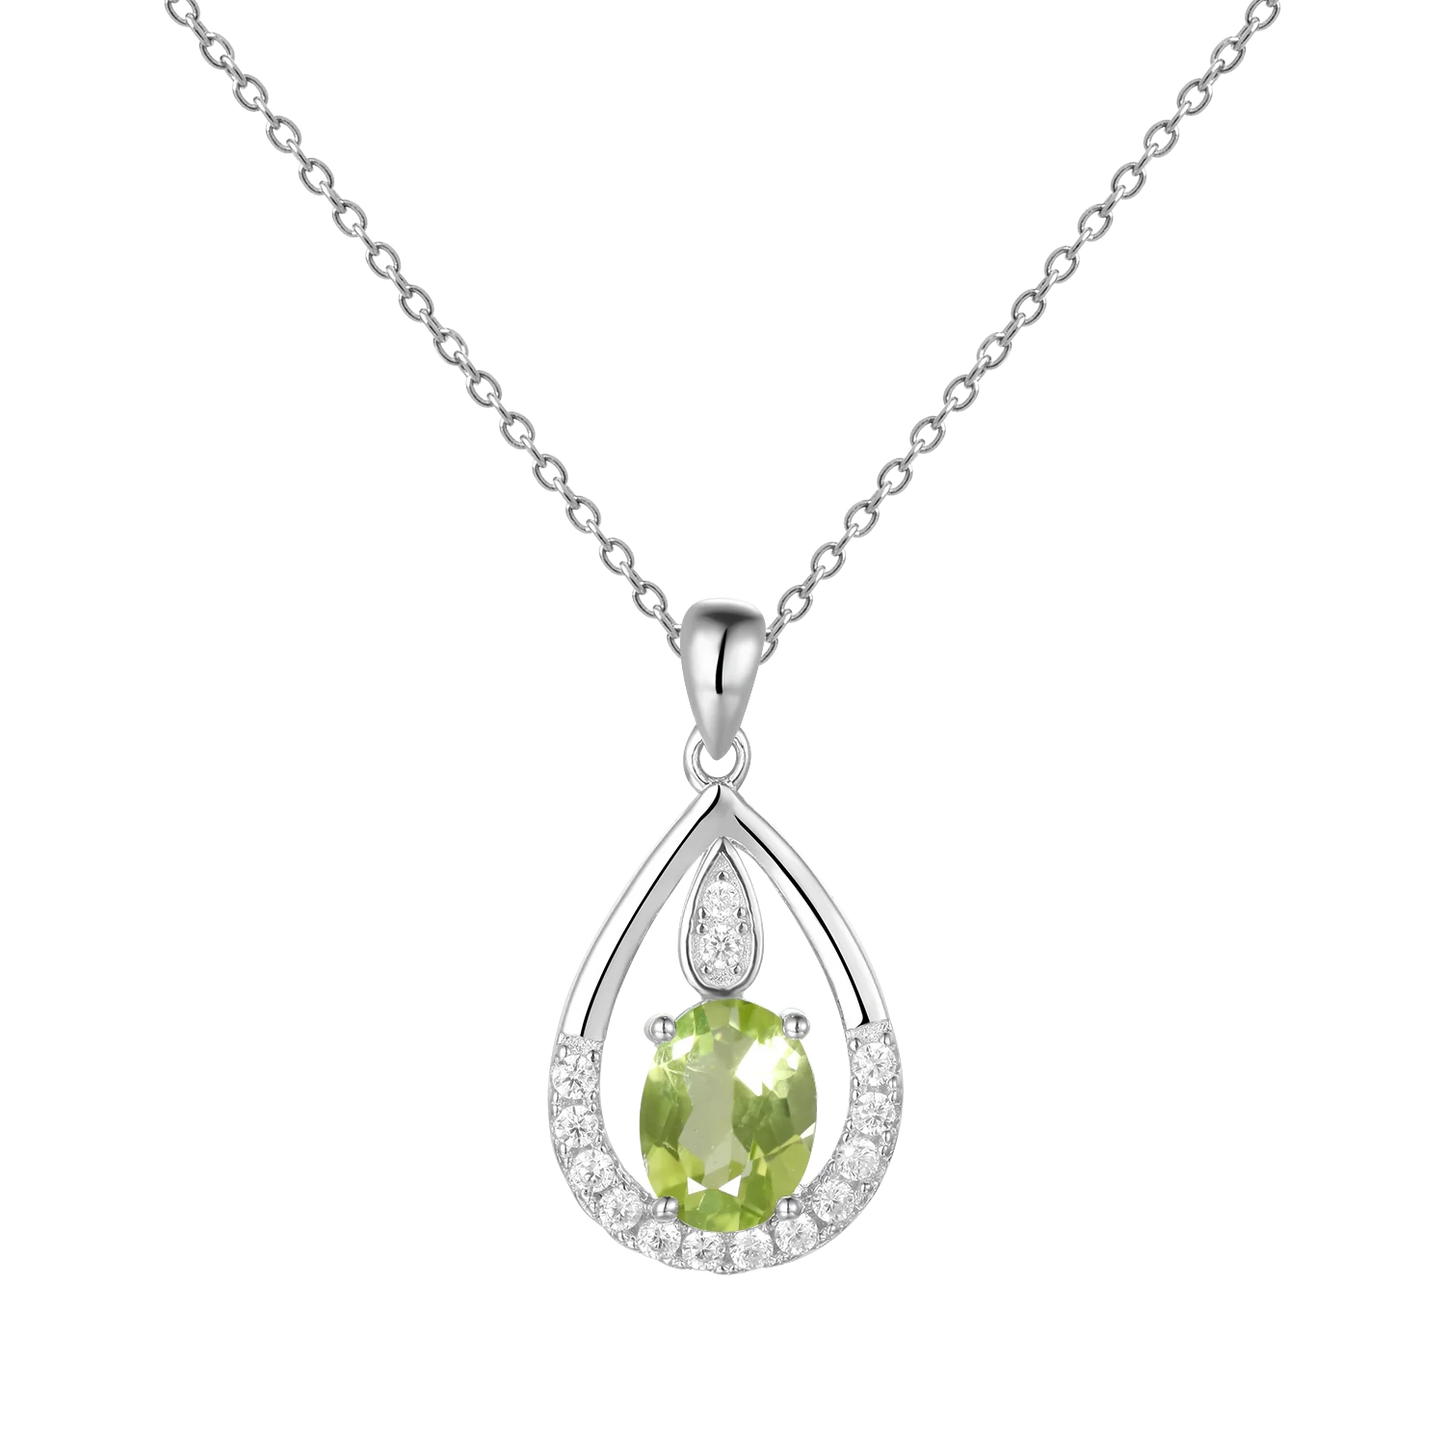 Gem's Ballet December Birthstone Topaz Necklace 6x8mm Oval Pink Topaz Pendant Necklace in 925 Sterling Silver with 18" Chain Peridot